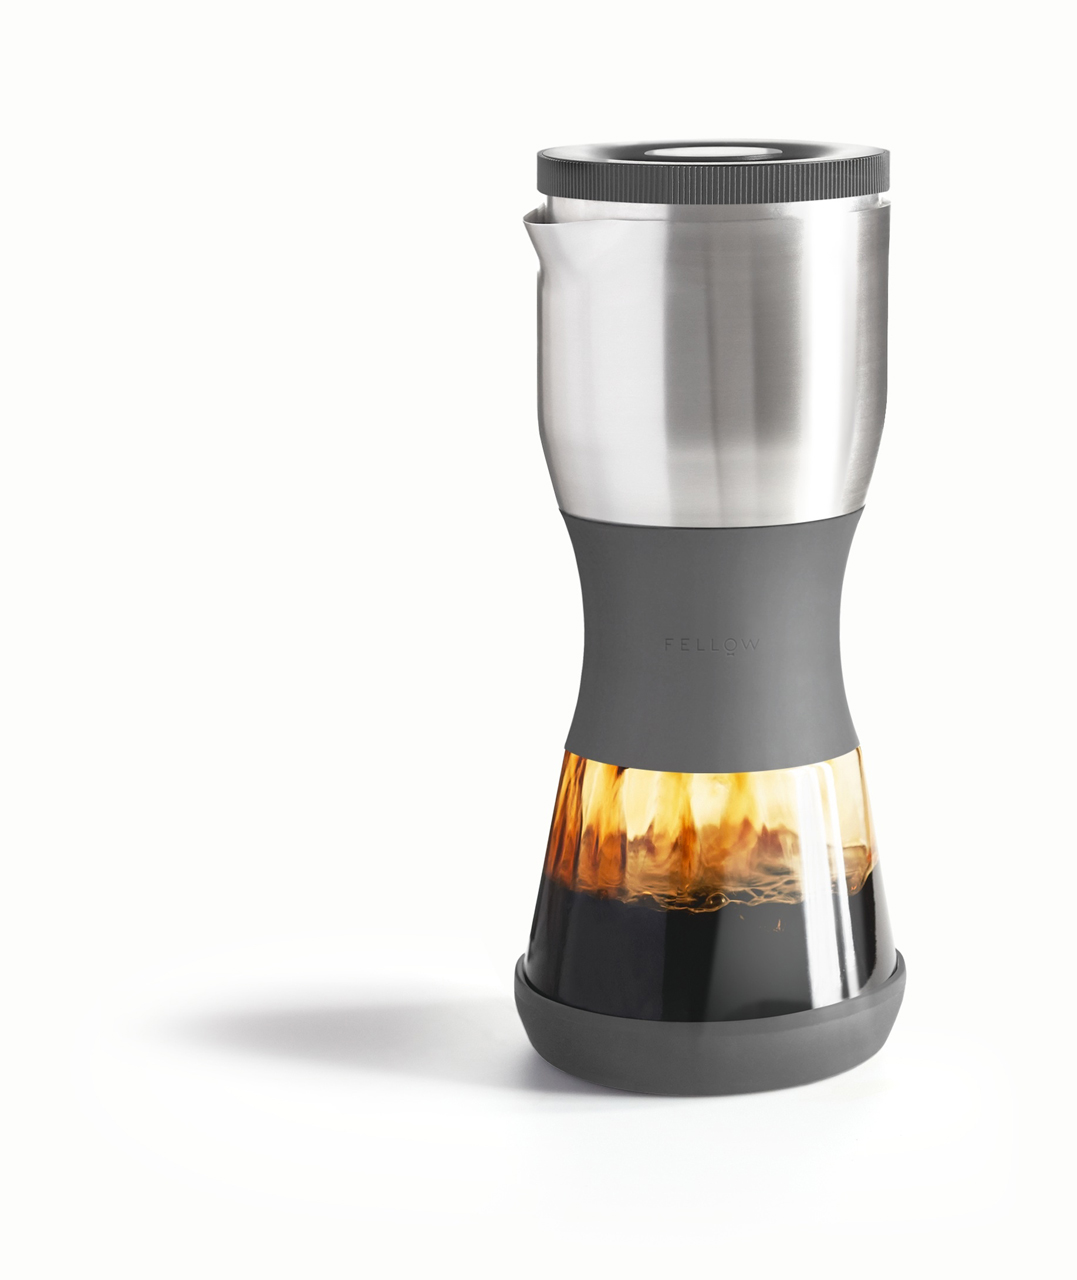 Duo Coffee Steeper: A new take on the traditional French press